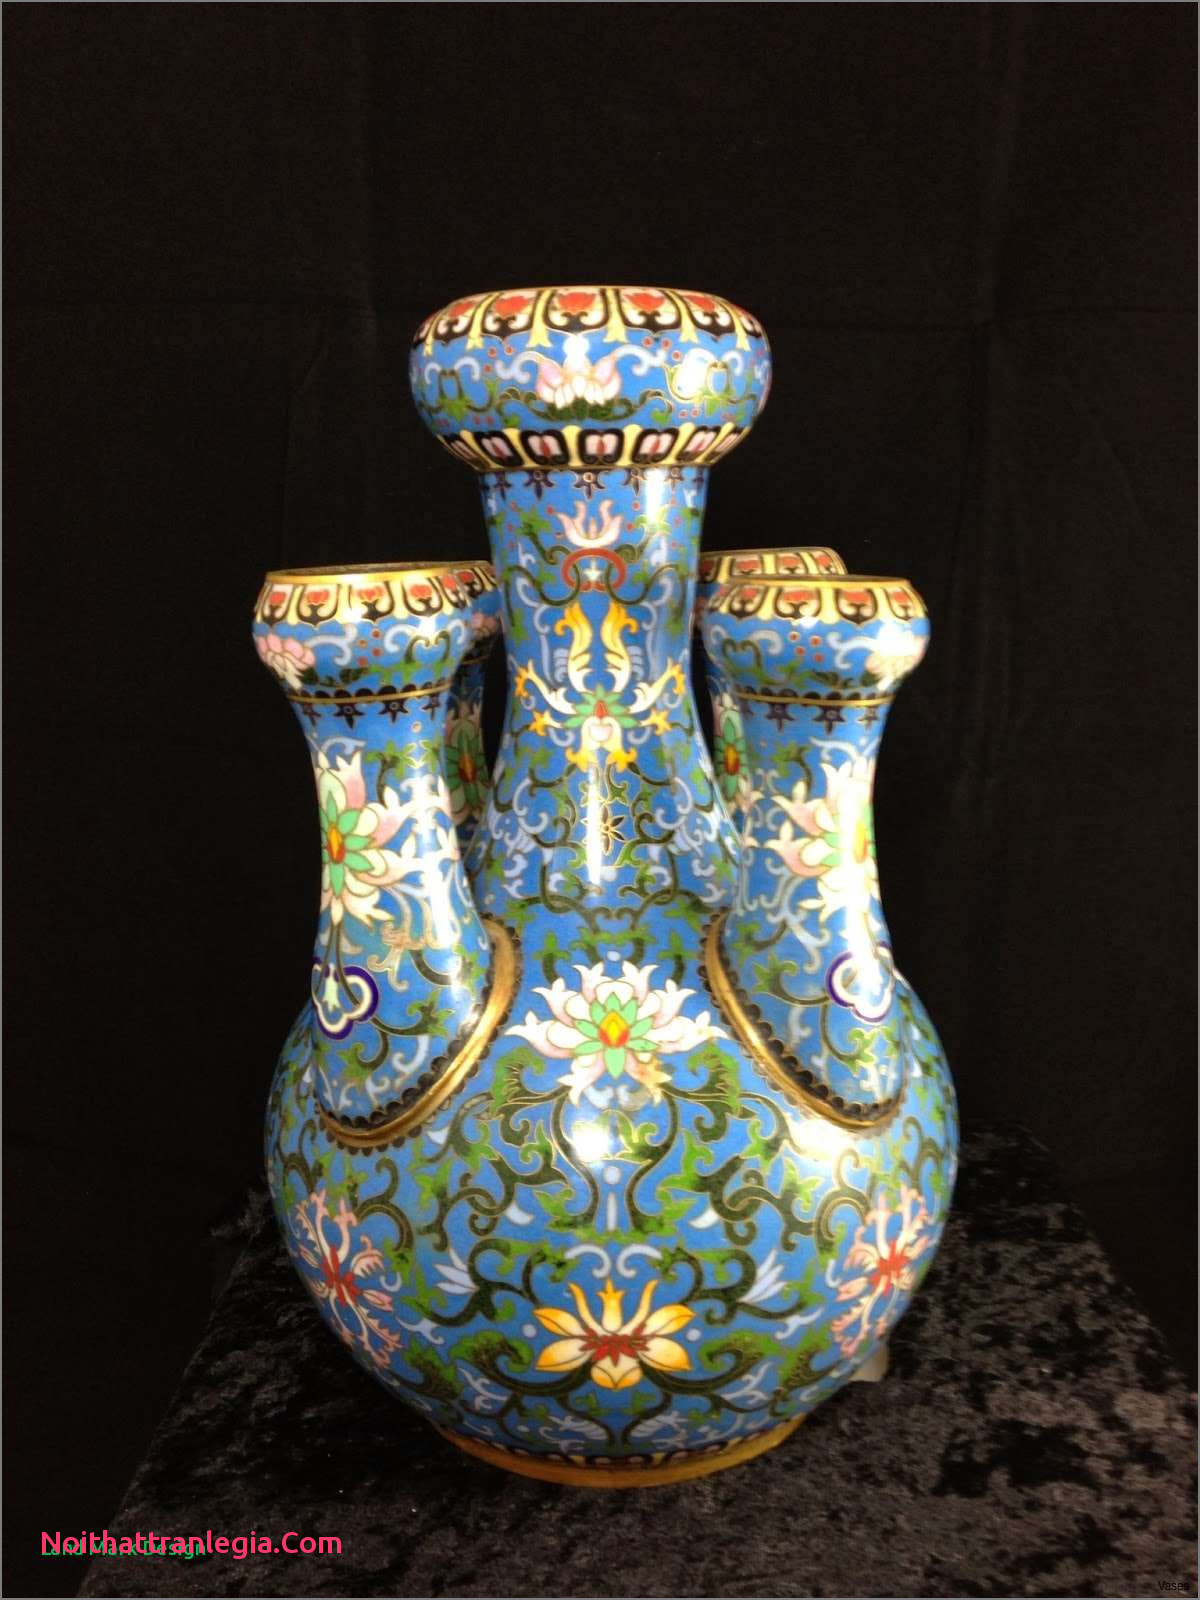 chinese ceramic vases antique of 20 chinese antique vase noithattranlegia vases design with regard to 213 1h vases antique asian the increased trade of chinese ware during 16th century has significantly